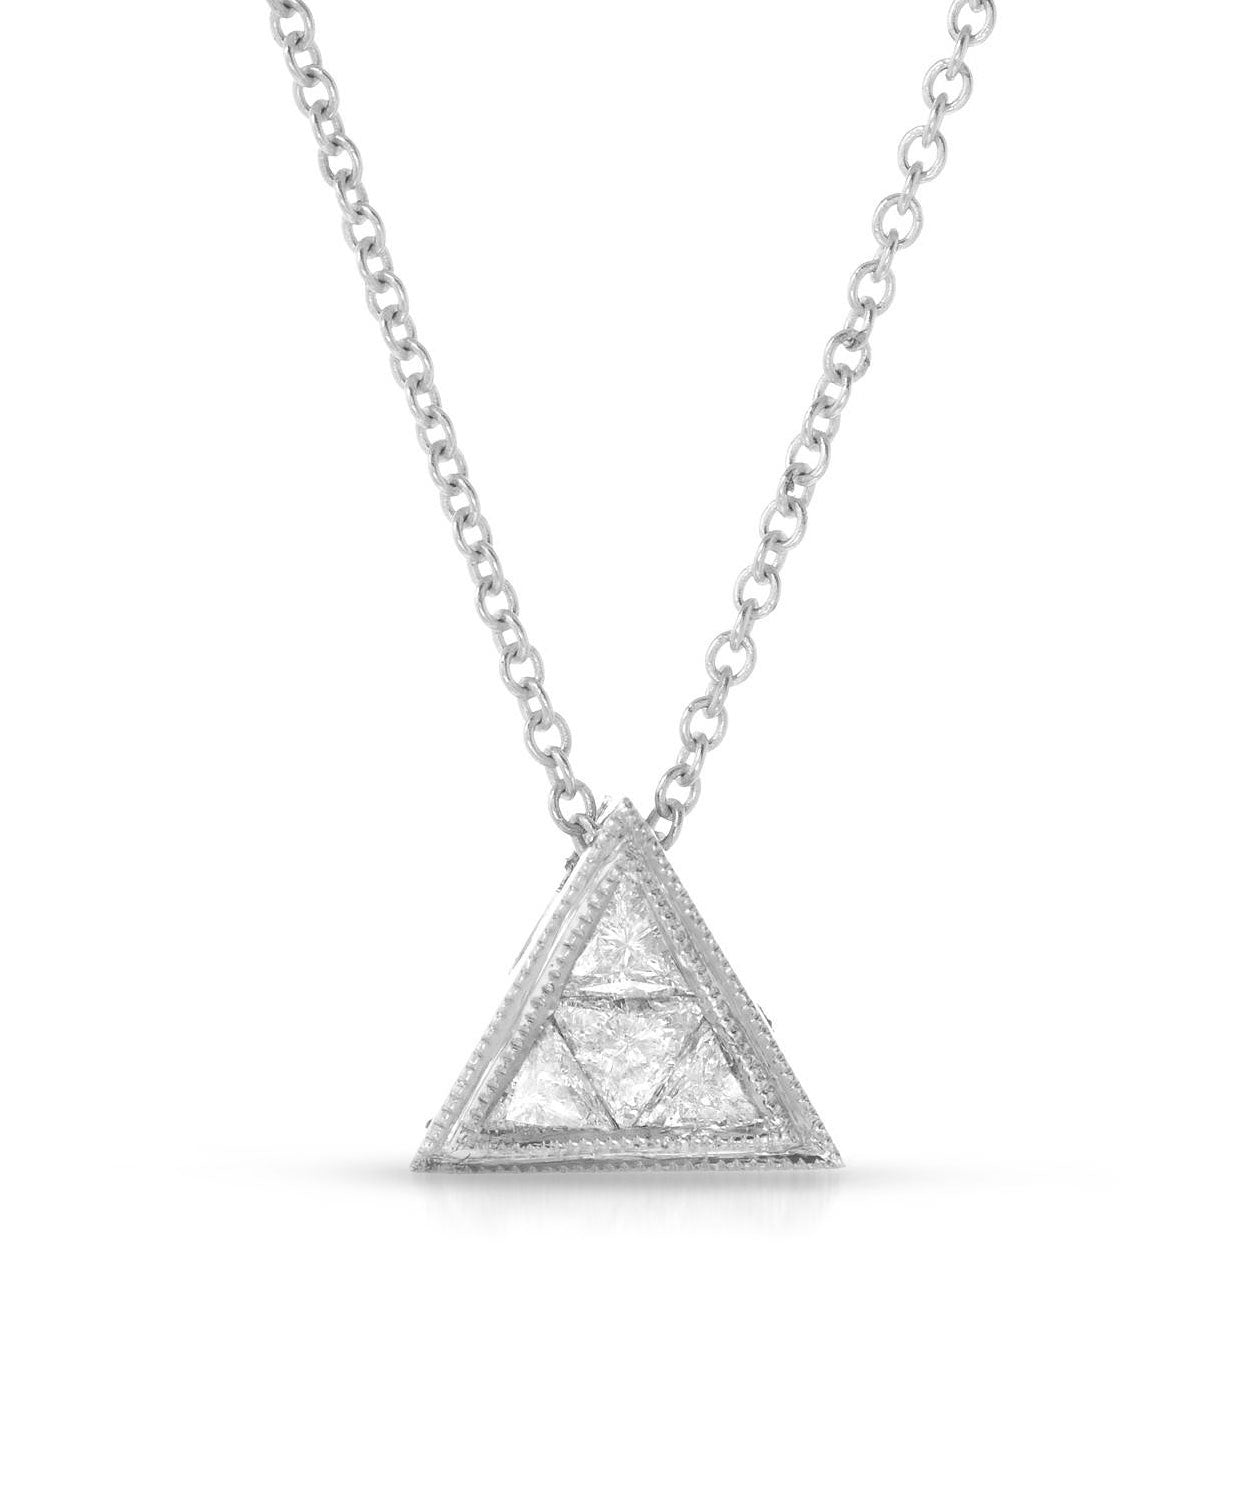 Signature Collection 0.21 ctw Diamond 14k Gold Triangle Pendant With Chain View 1